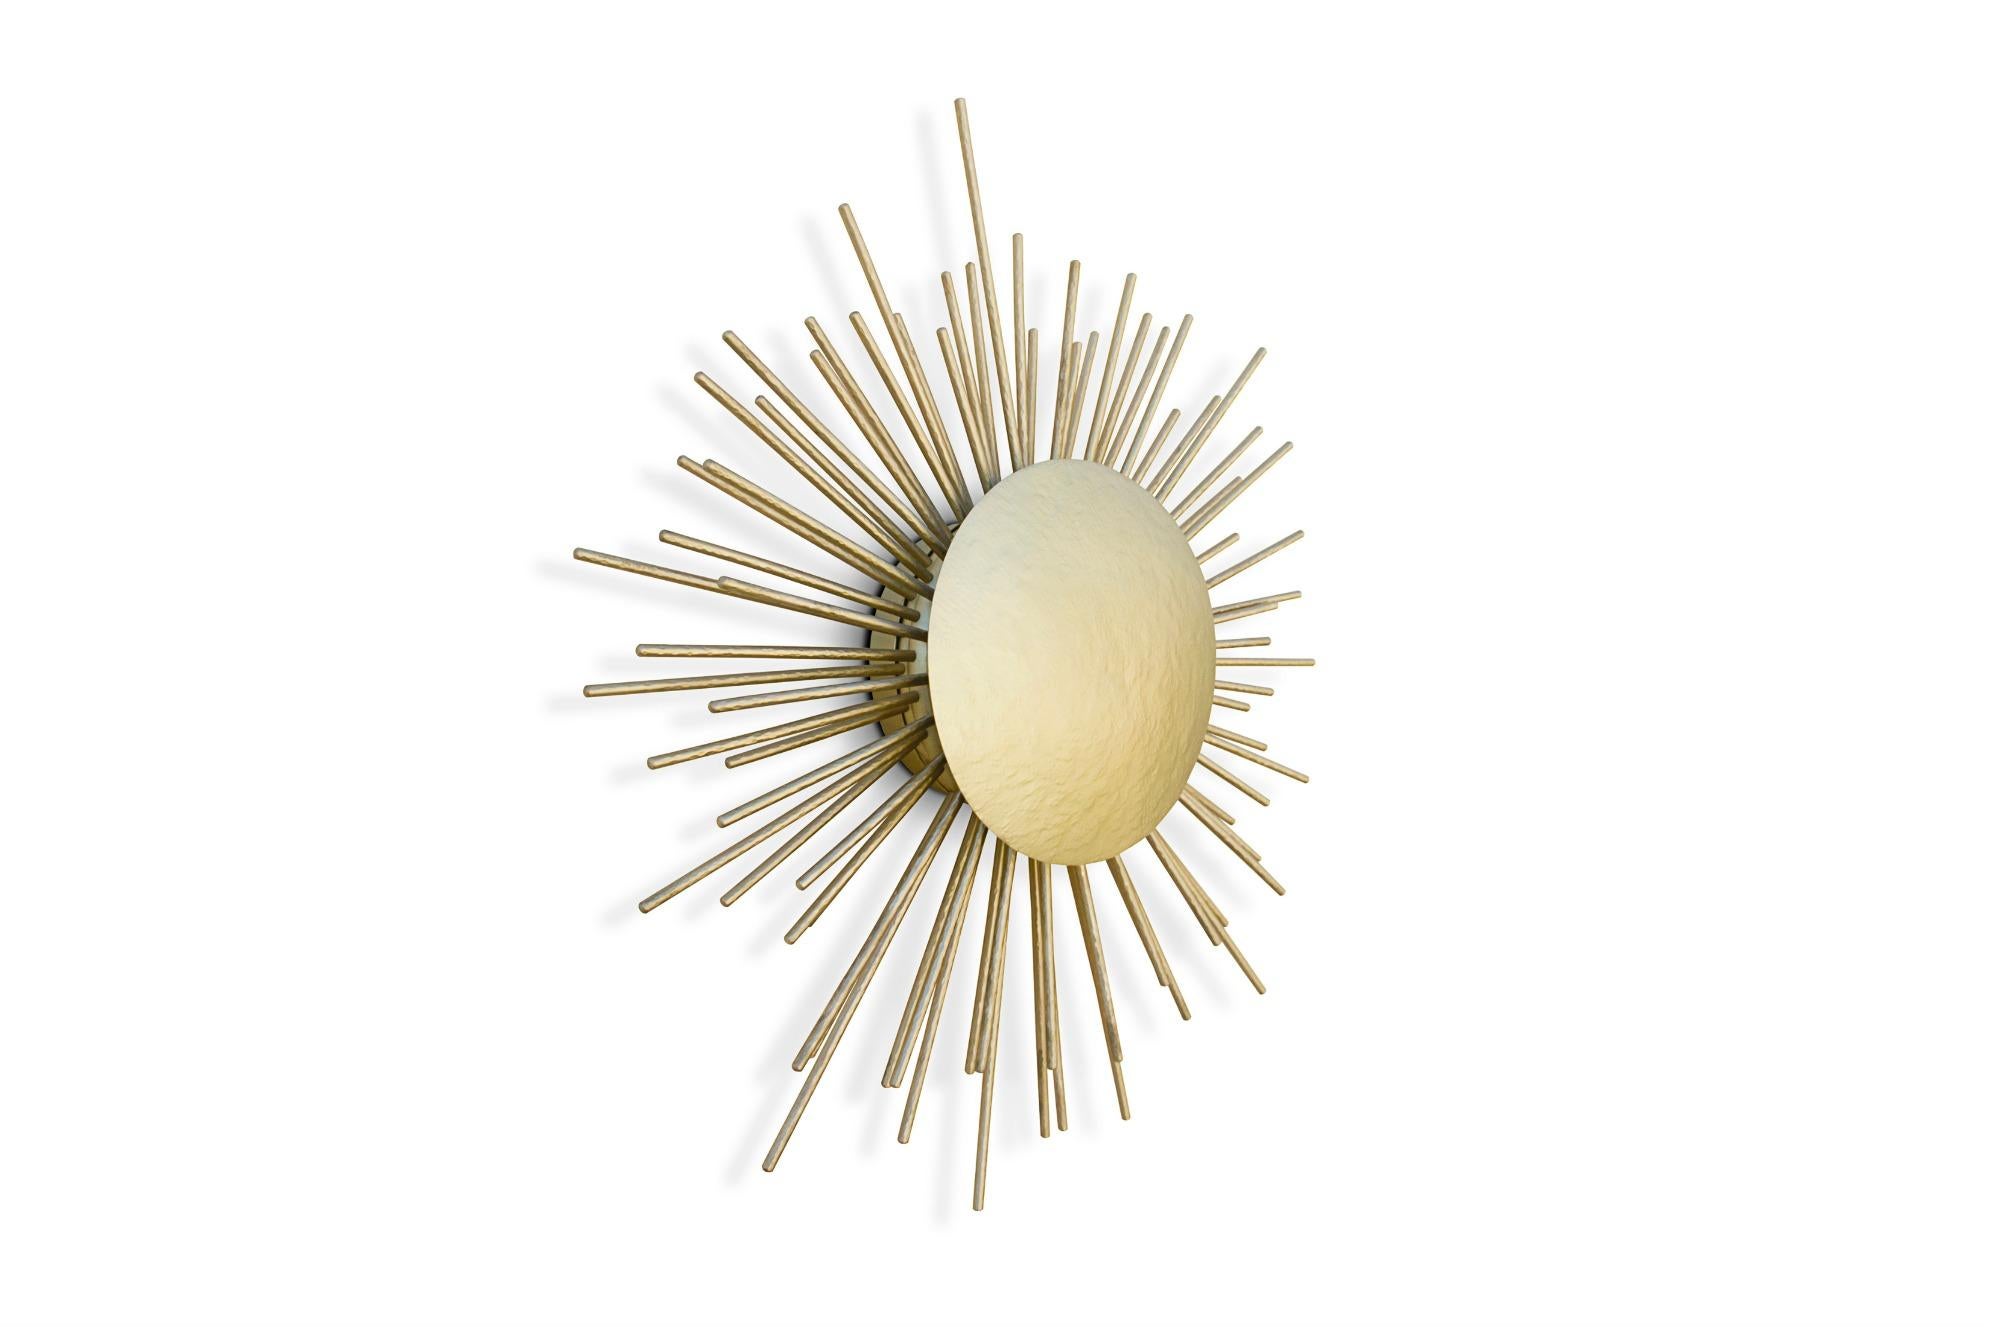 In an attempt to reinterpret the sun in a contemporary lighting piece, our designers conceived SOLEIL Wall Light. With a structure in hammered brass, this wall sconce will expand all over any room like sunlight rays. Discreet yet remarkable, SOLEIL